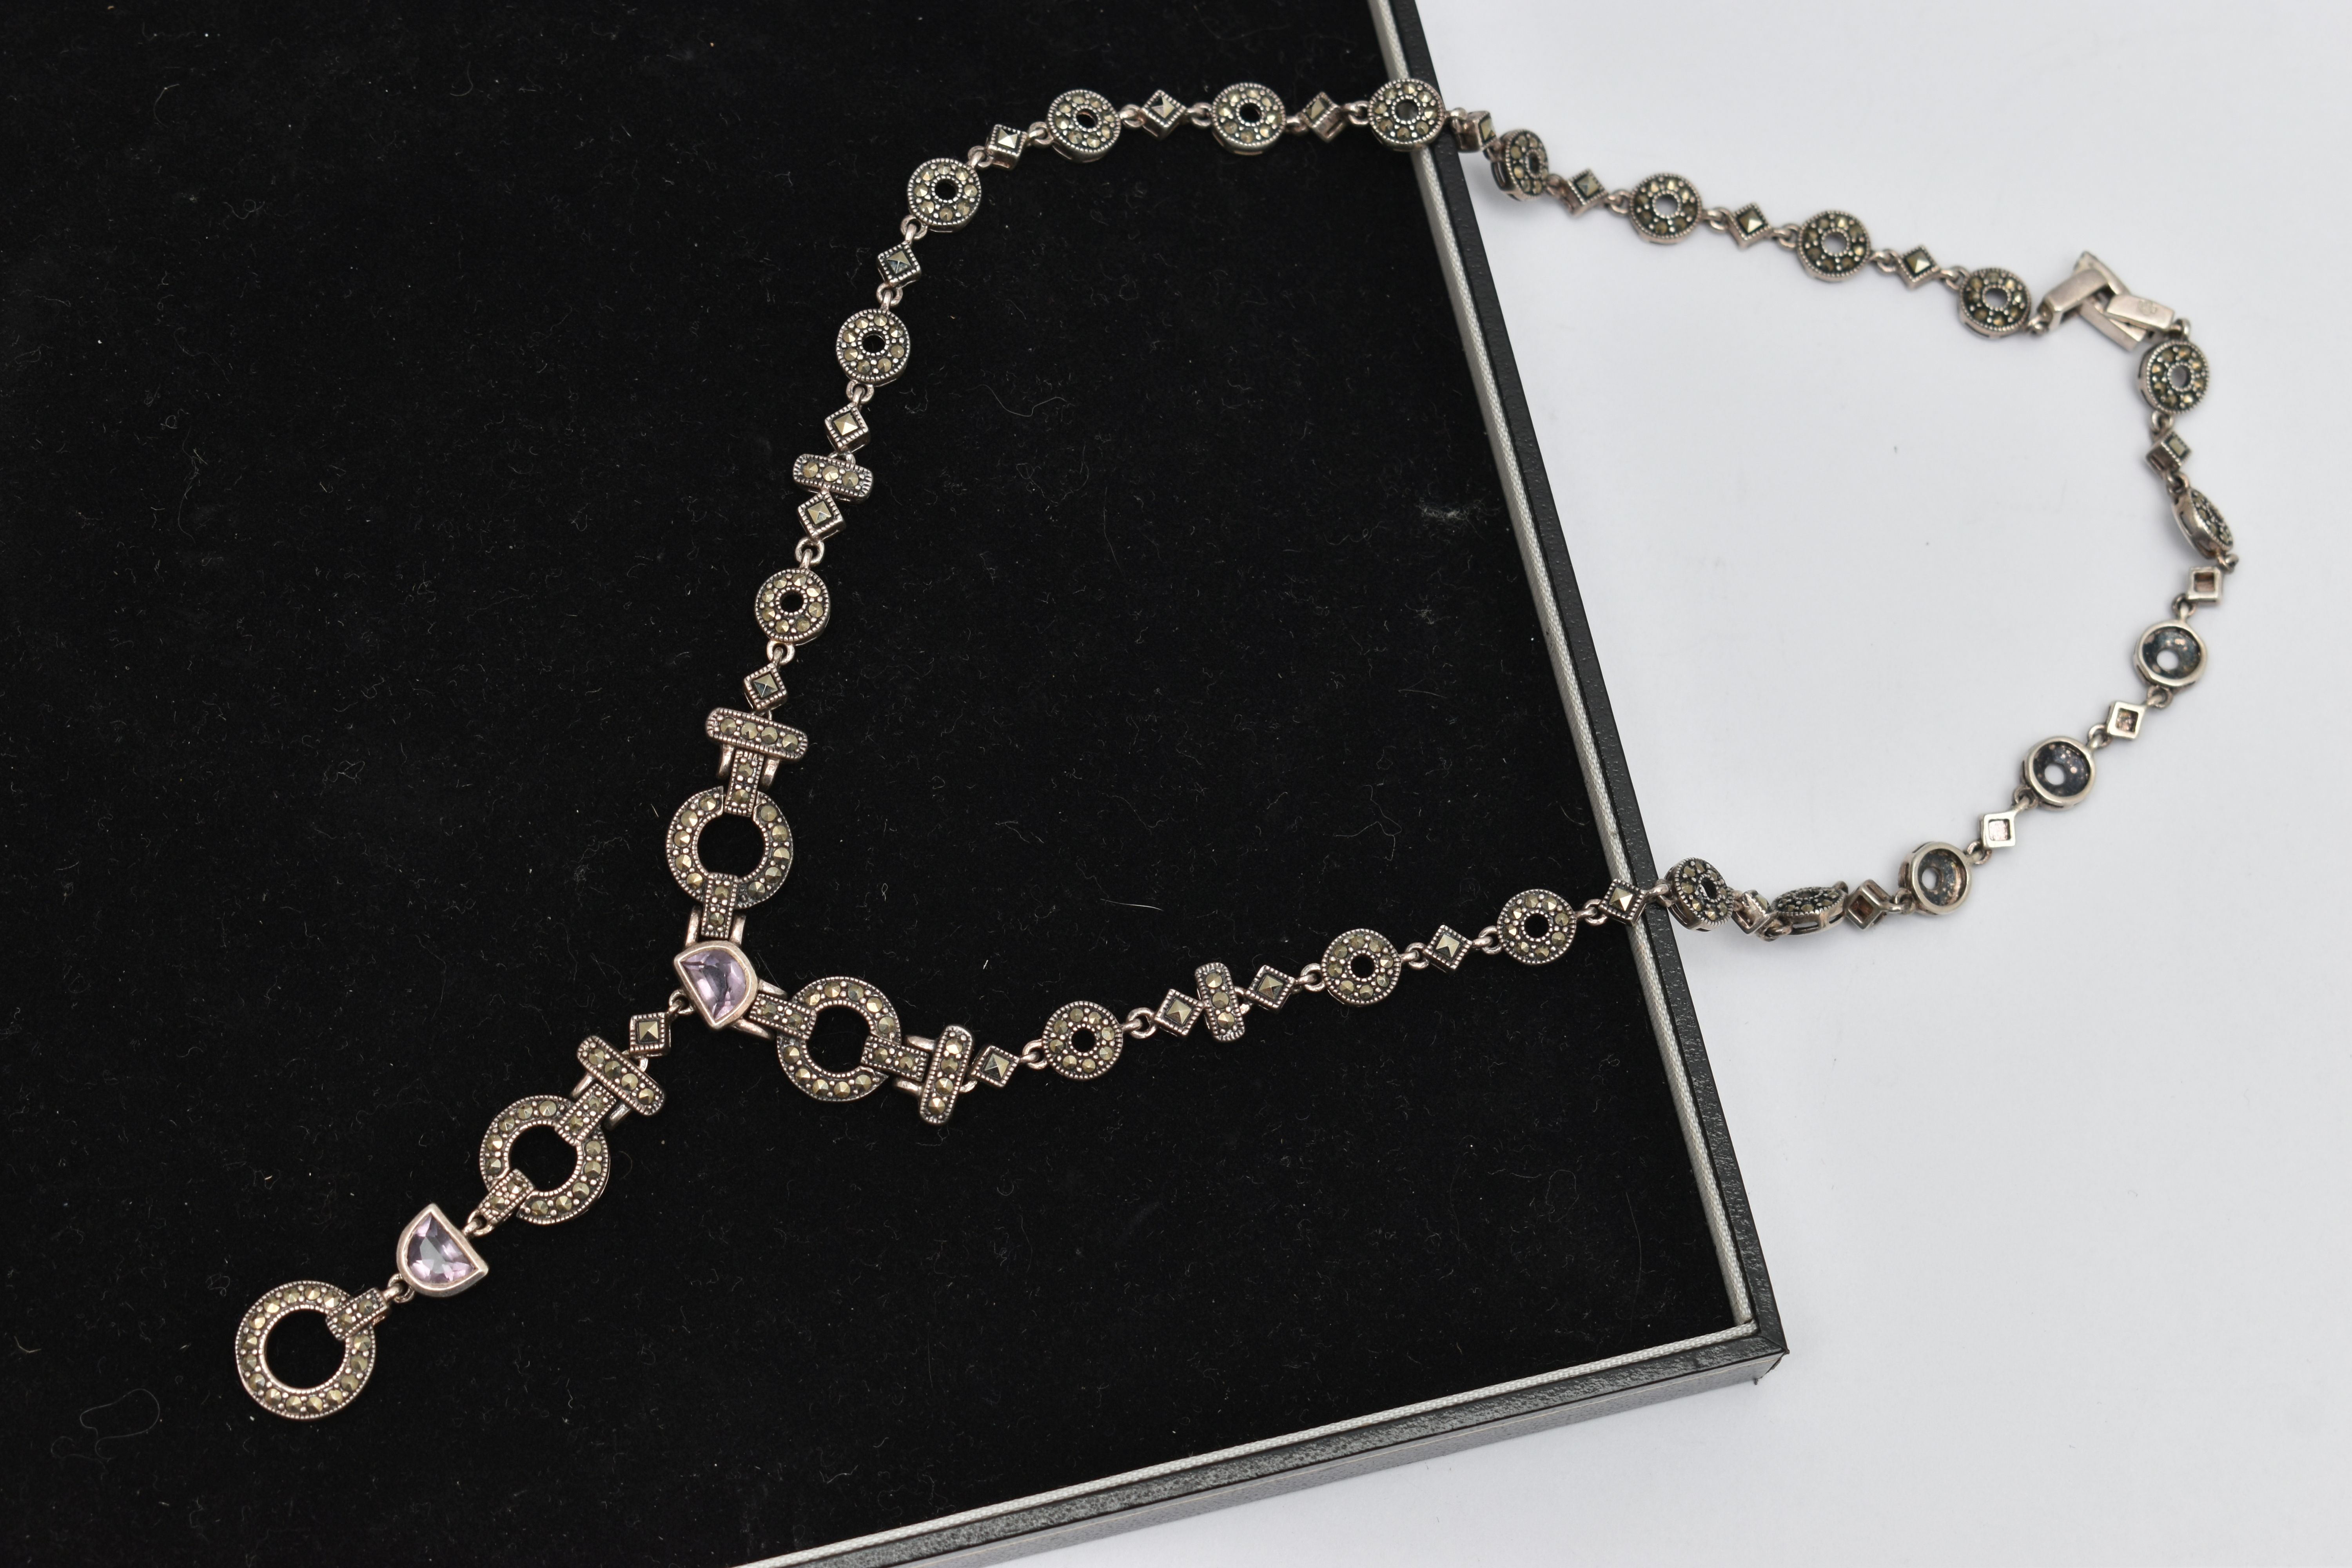 A MARCASITE AND AMETHYST NECKLACE, designed as circular, square and rectangular links joining at a